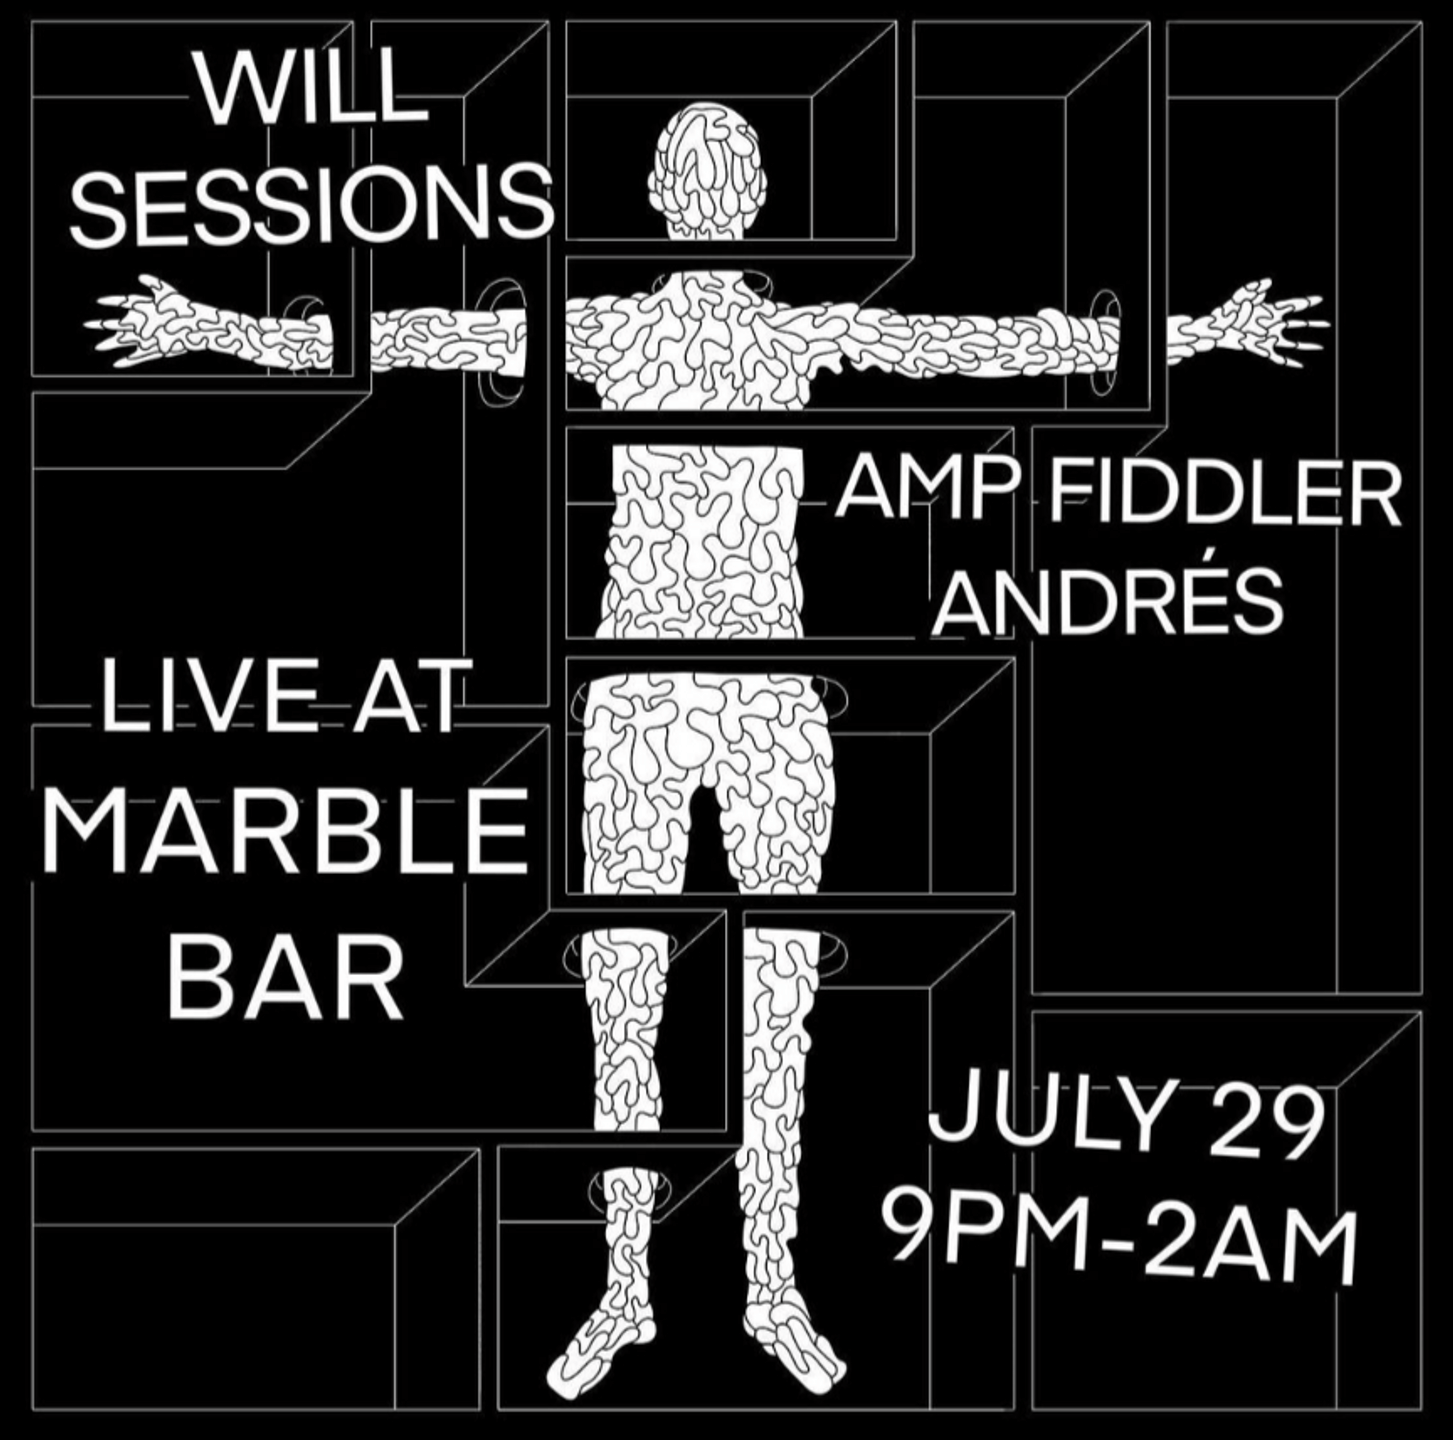 Marble Bar presents: Will Sessions wsg Amp Fiddler & Andrés - フライヤー表